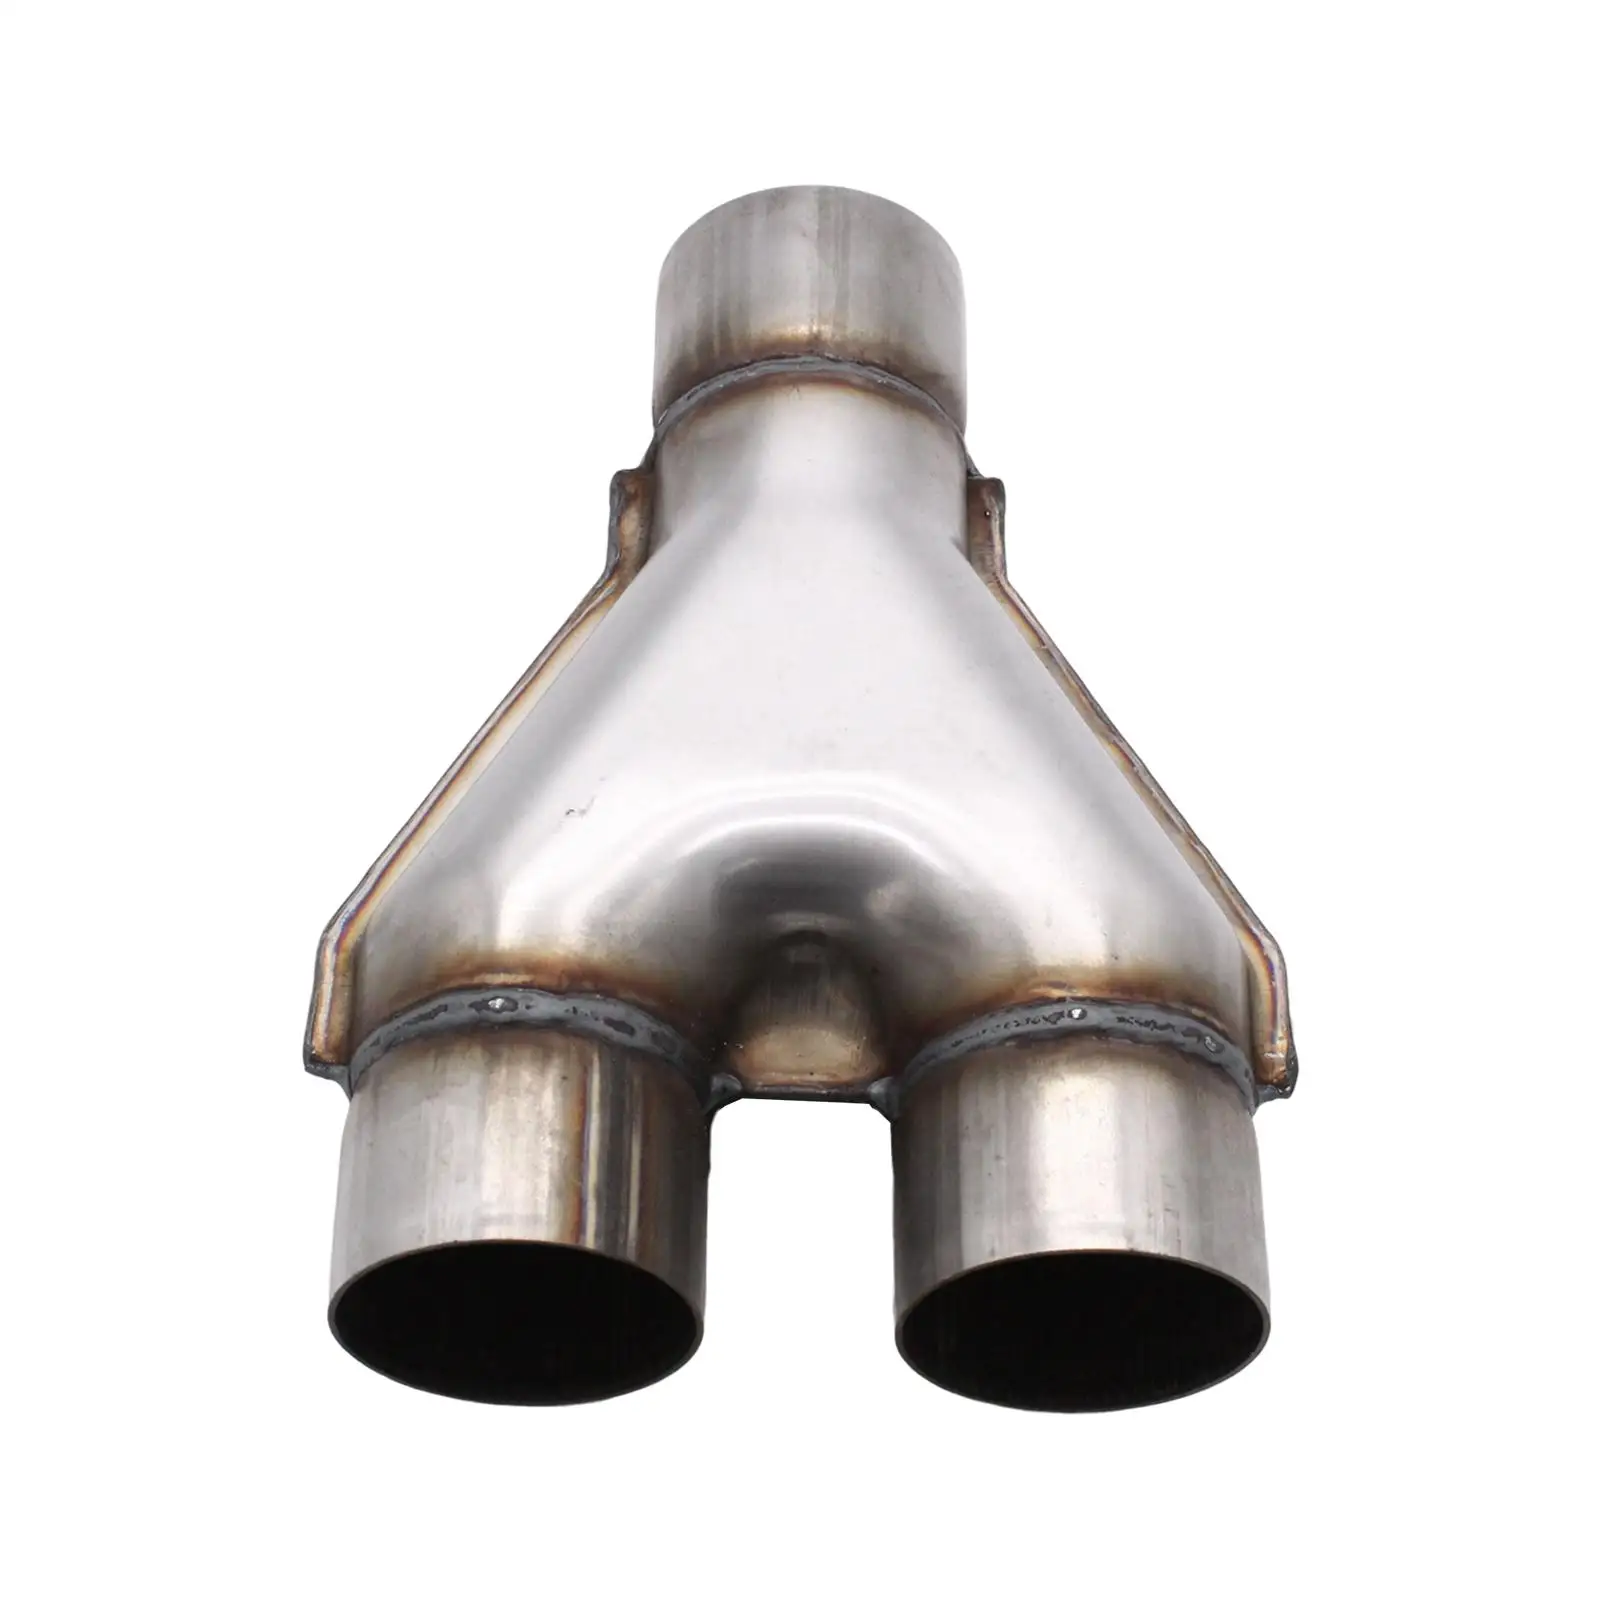 Exhaust Pipe Accessories for Premium Good Performance Easily Install